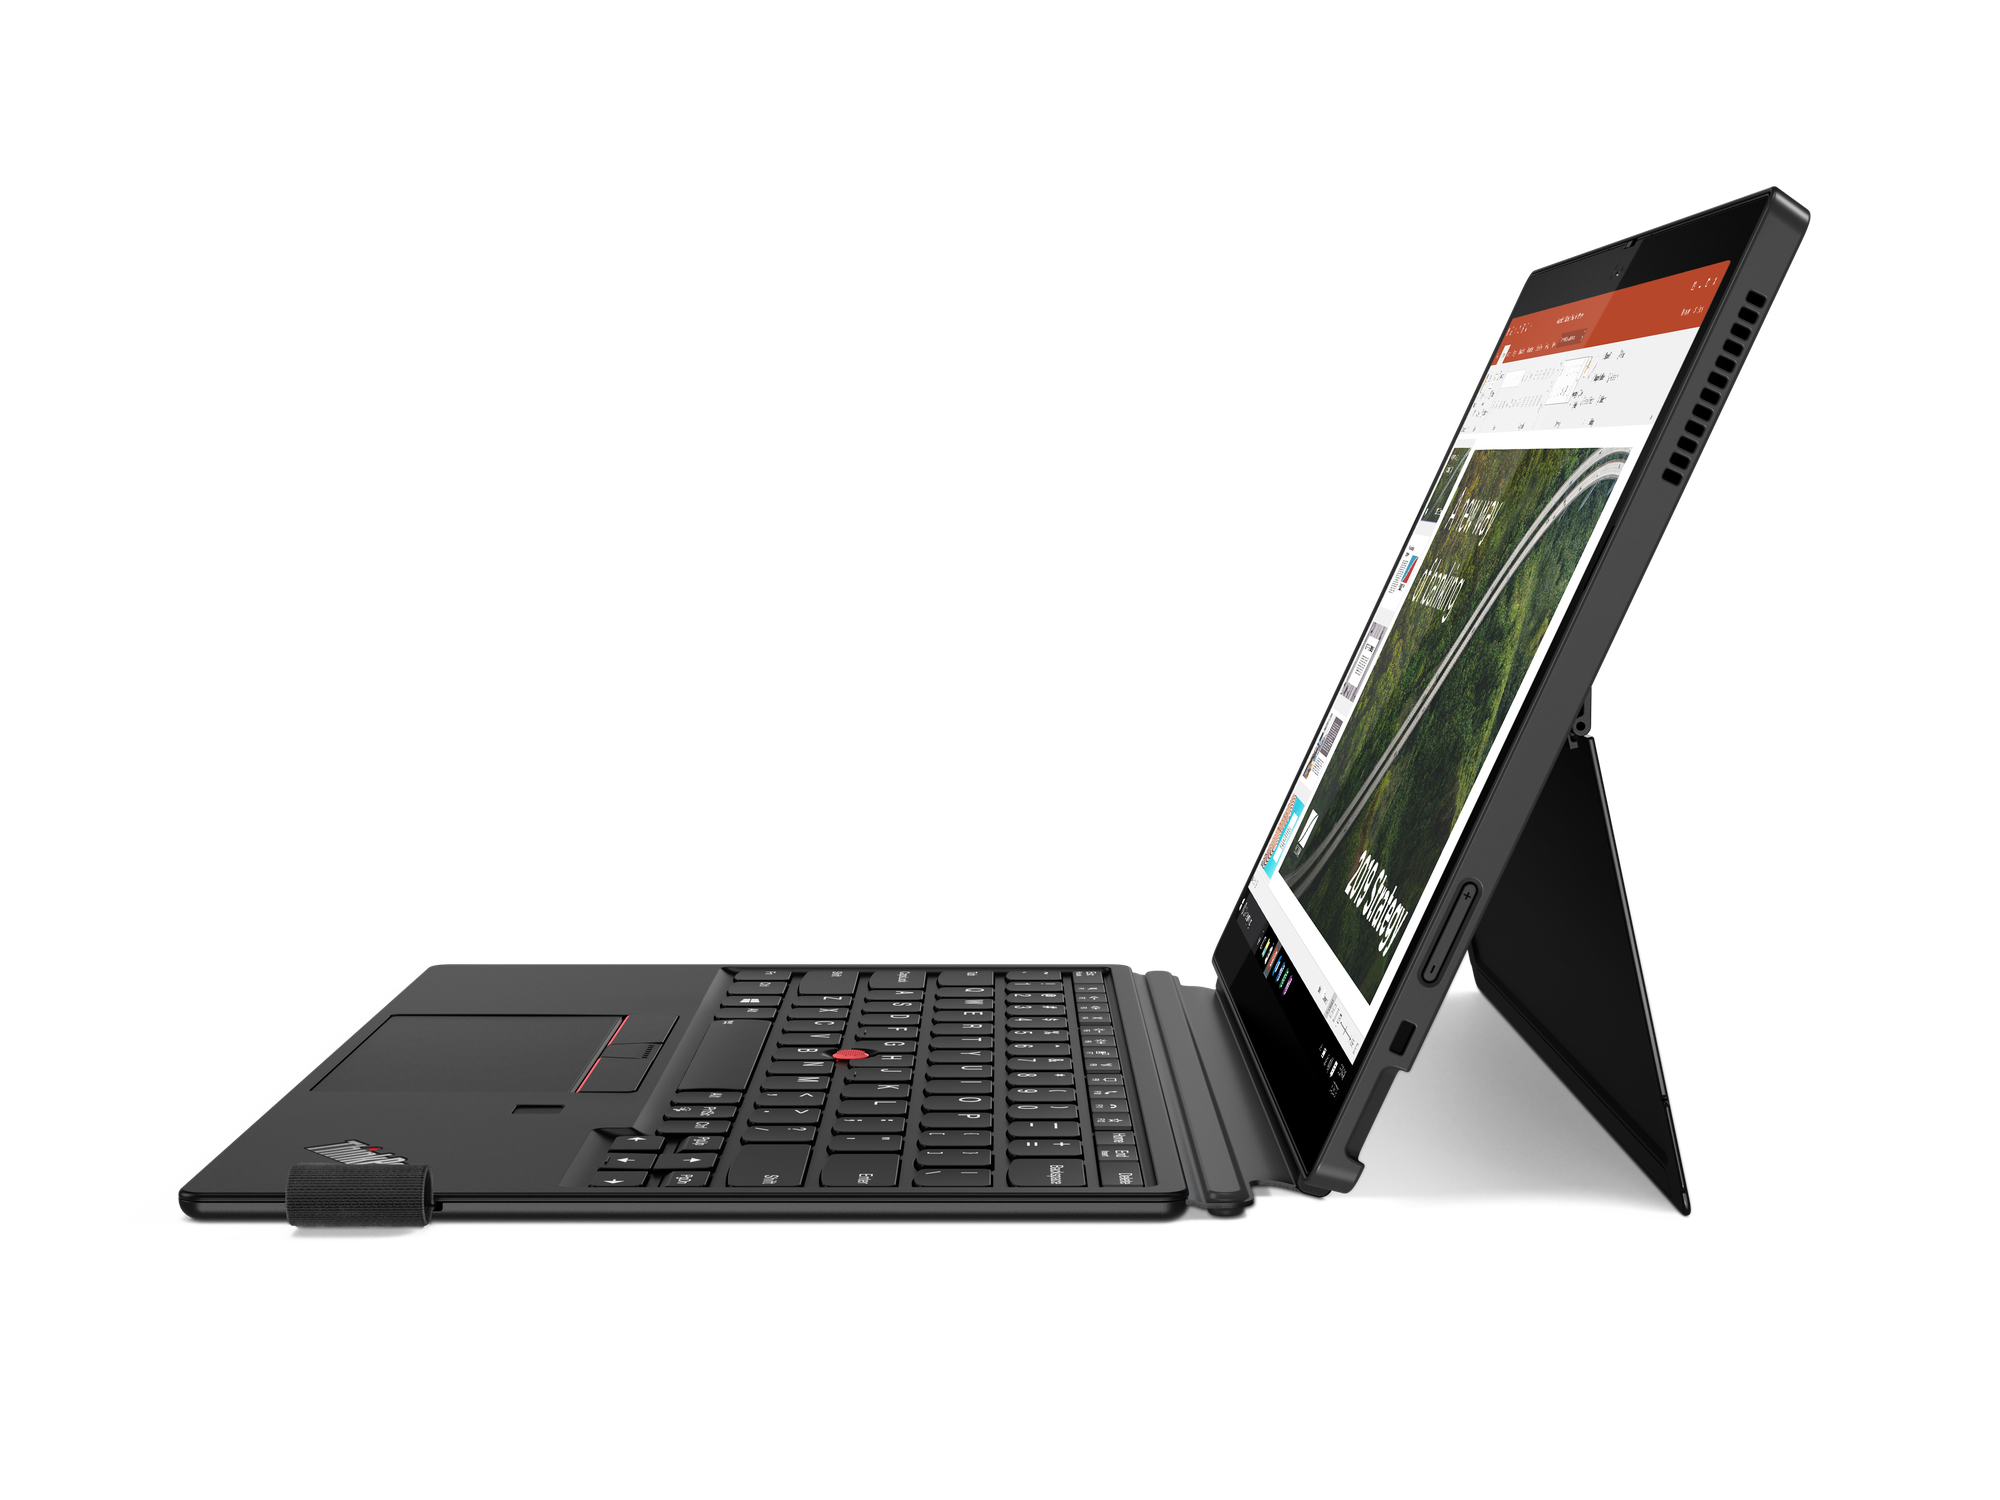 12 ThinkPad X12 Detachable With KB tour right side profile